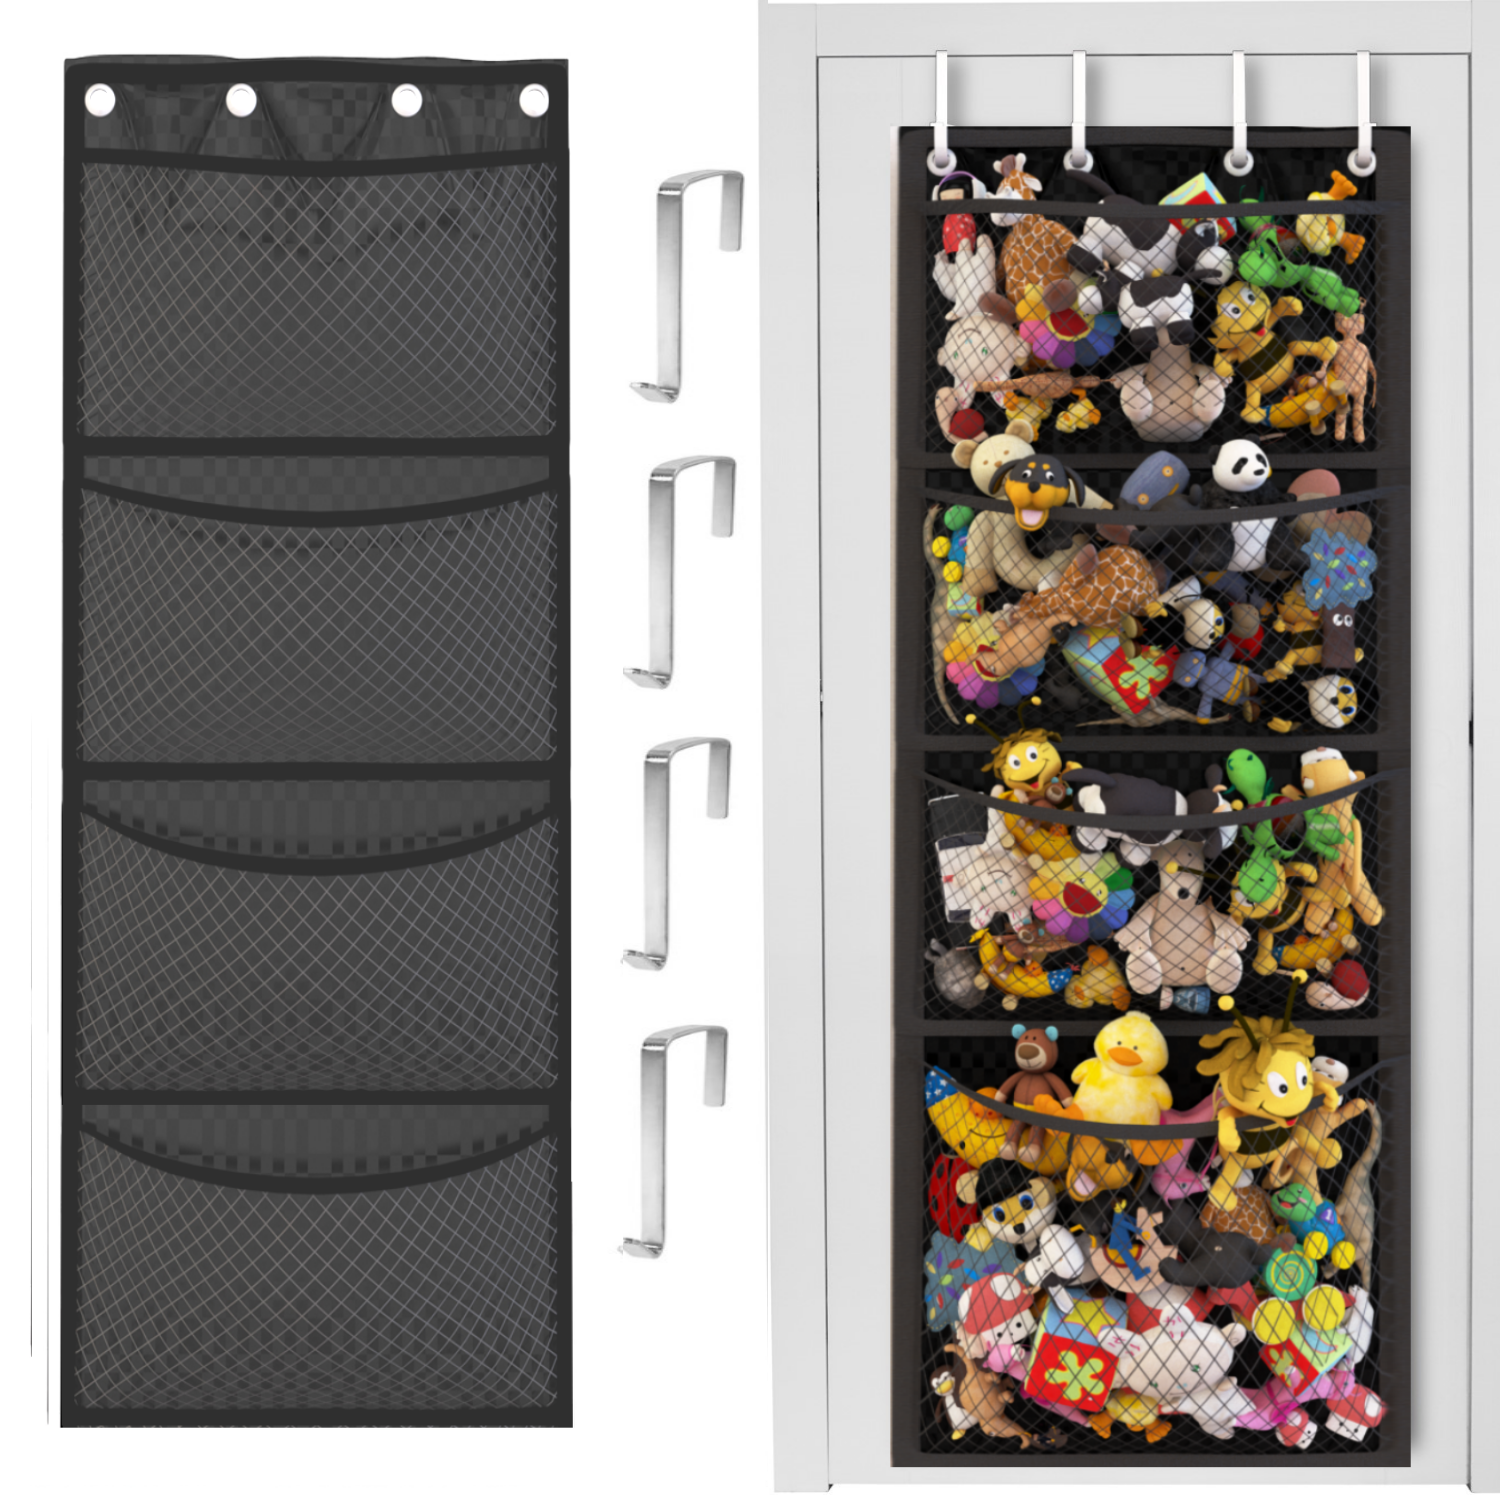 Stuffed Animal Storage,Over the Door Organizer for Filling Stuff , Portable  Hanging Stuffed Animal Storage ,Durable Stuffed Animal Net or Hammock,Easy  to Install(Black) 